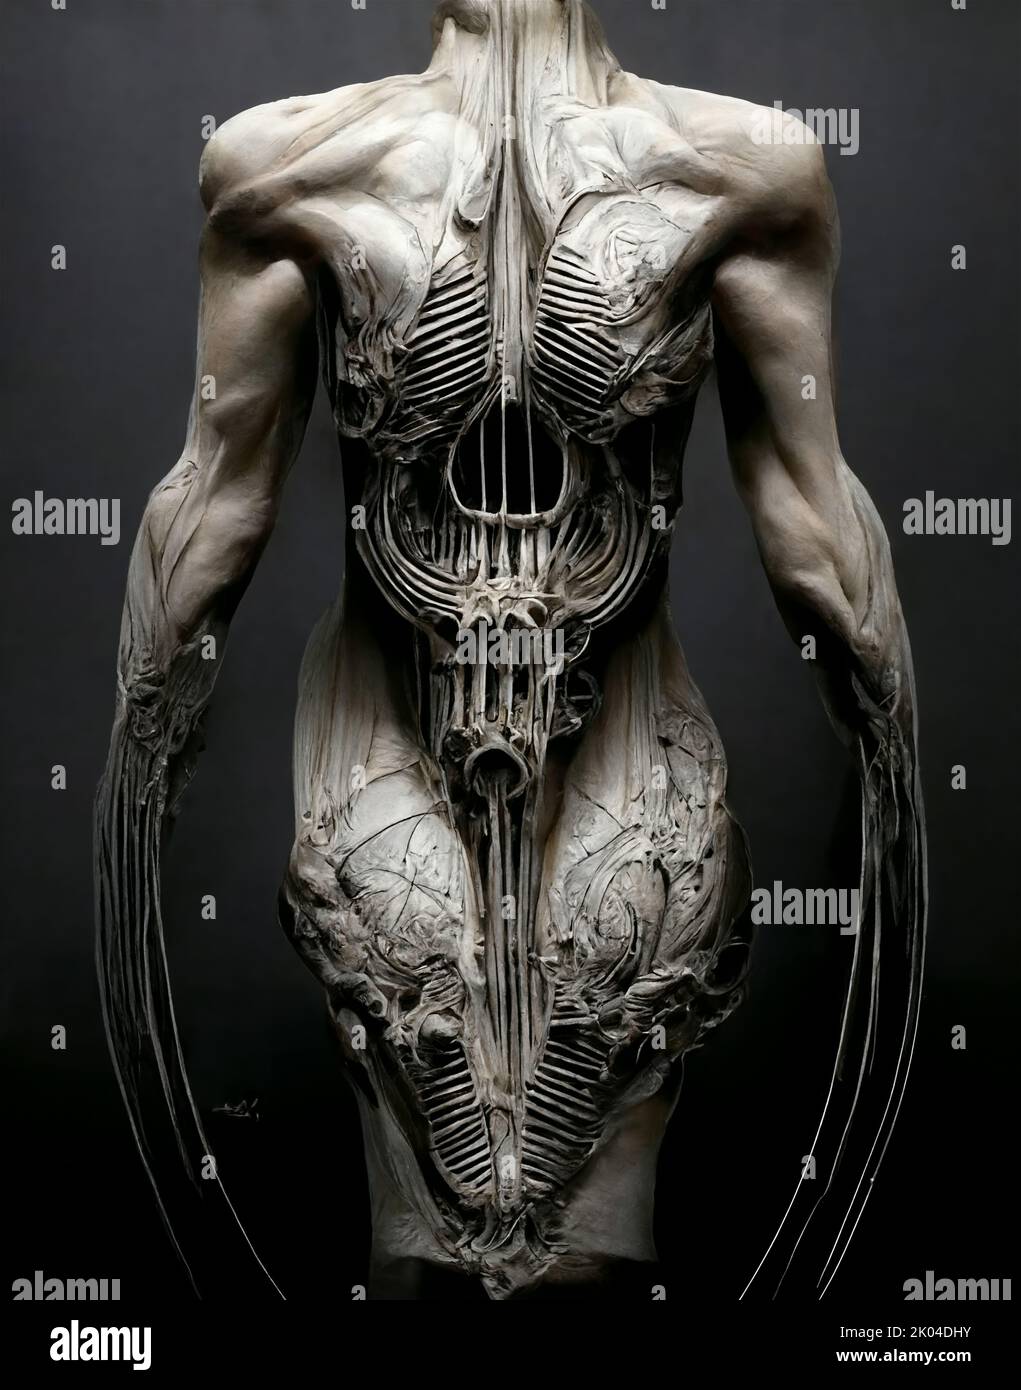 Rear view creepy monster person body with bones muscles over dark background, abstract painting, vertical view, giger style Stock Photo